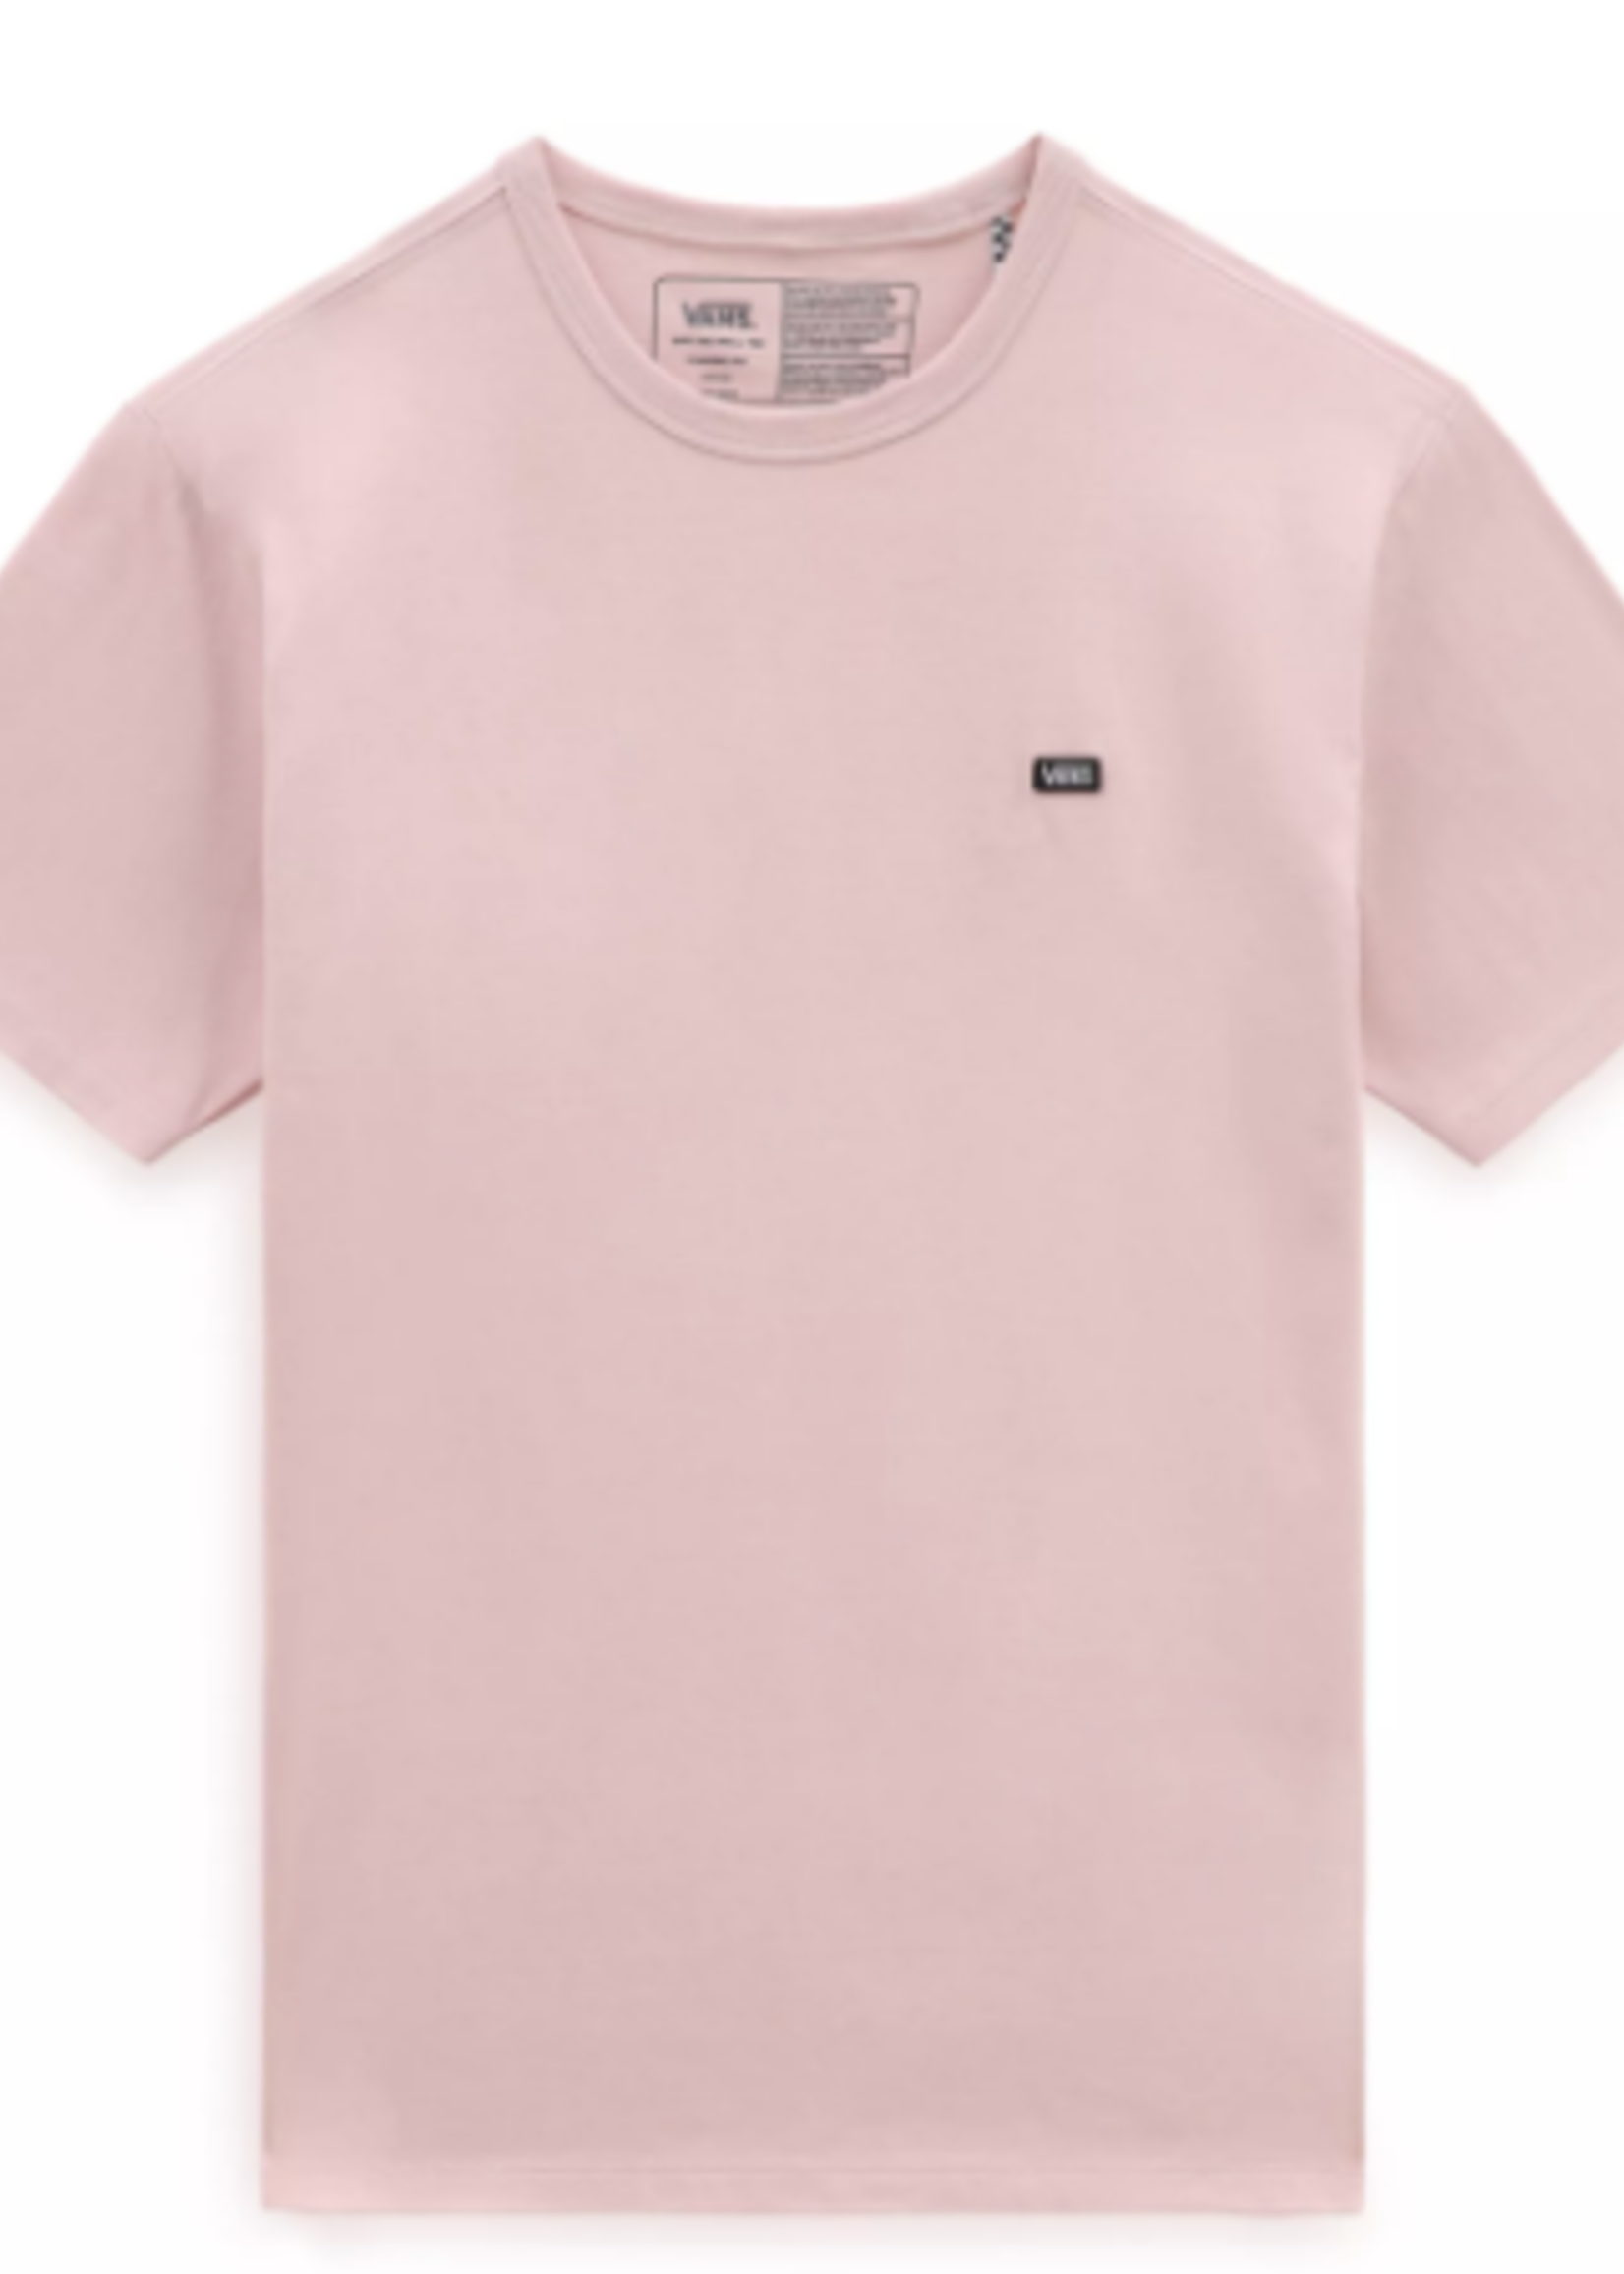 Vans Off The Wall Classic Tee Rose Smoke